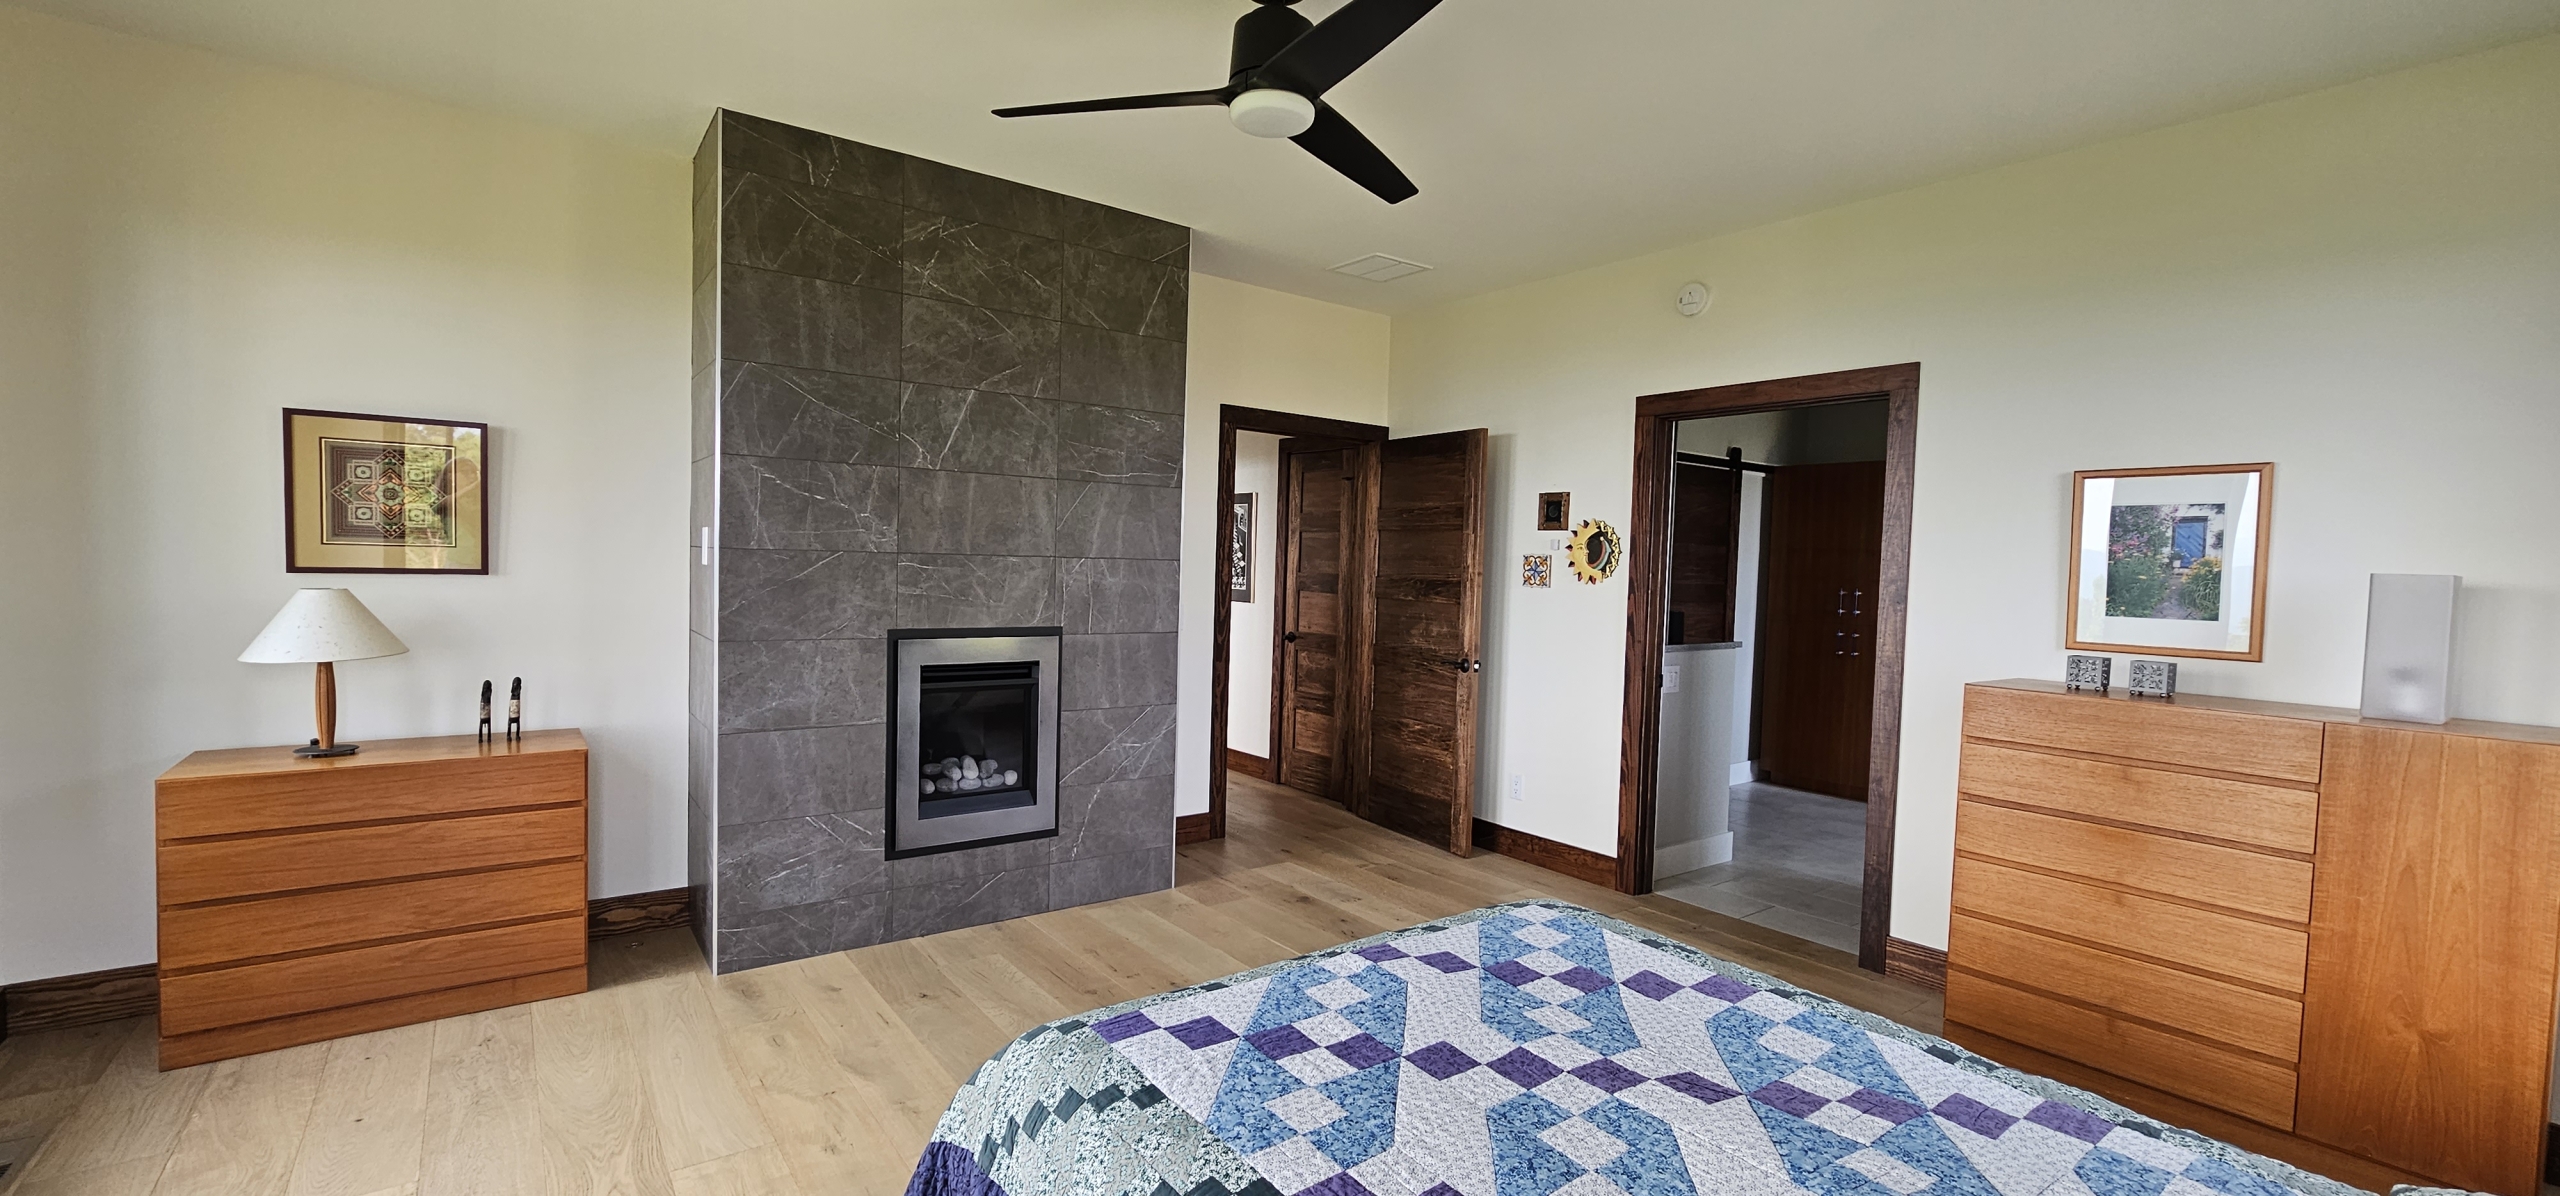 stone chimney and bedroom